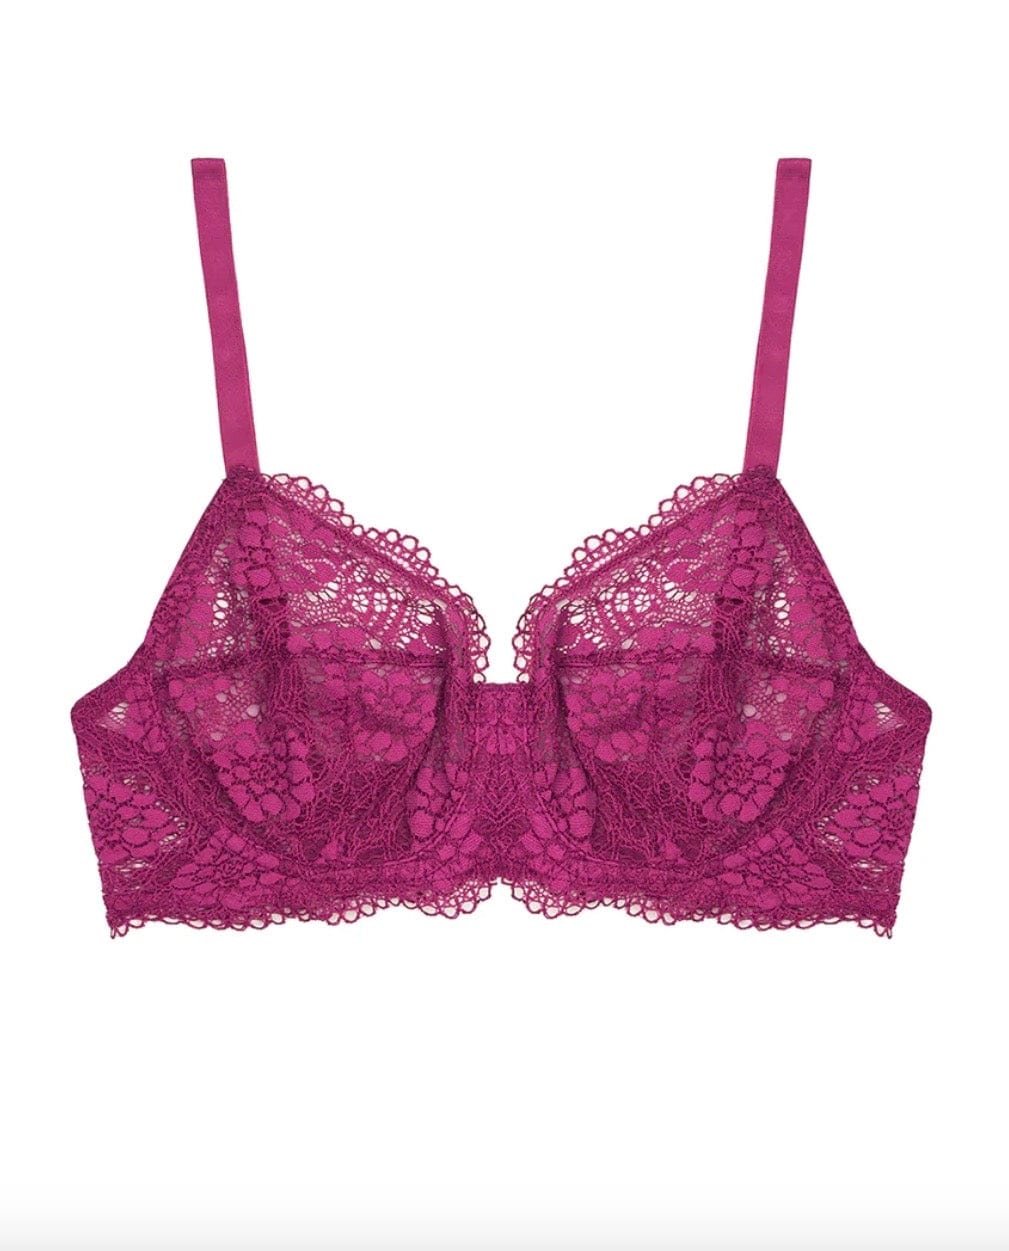 ELSE Peony stretch-lace soft-cup bralette